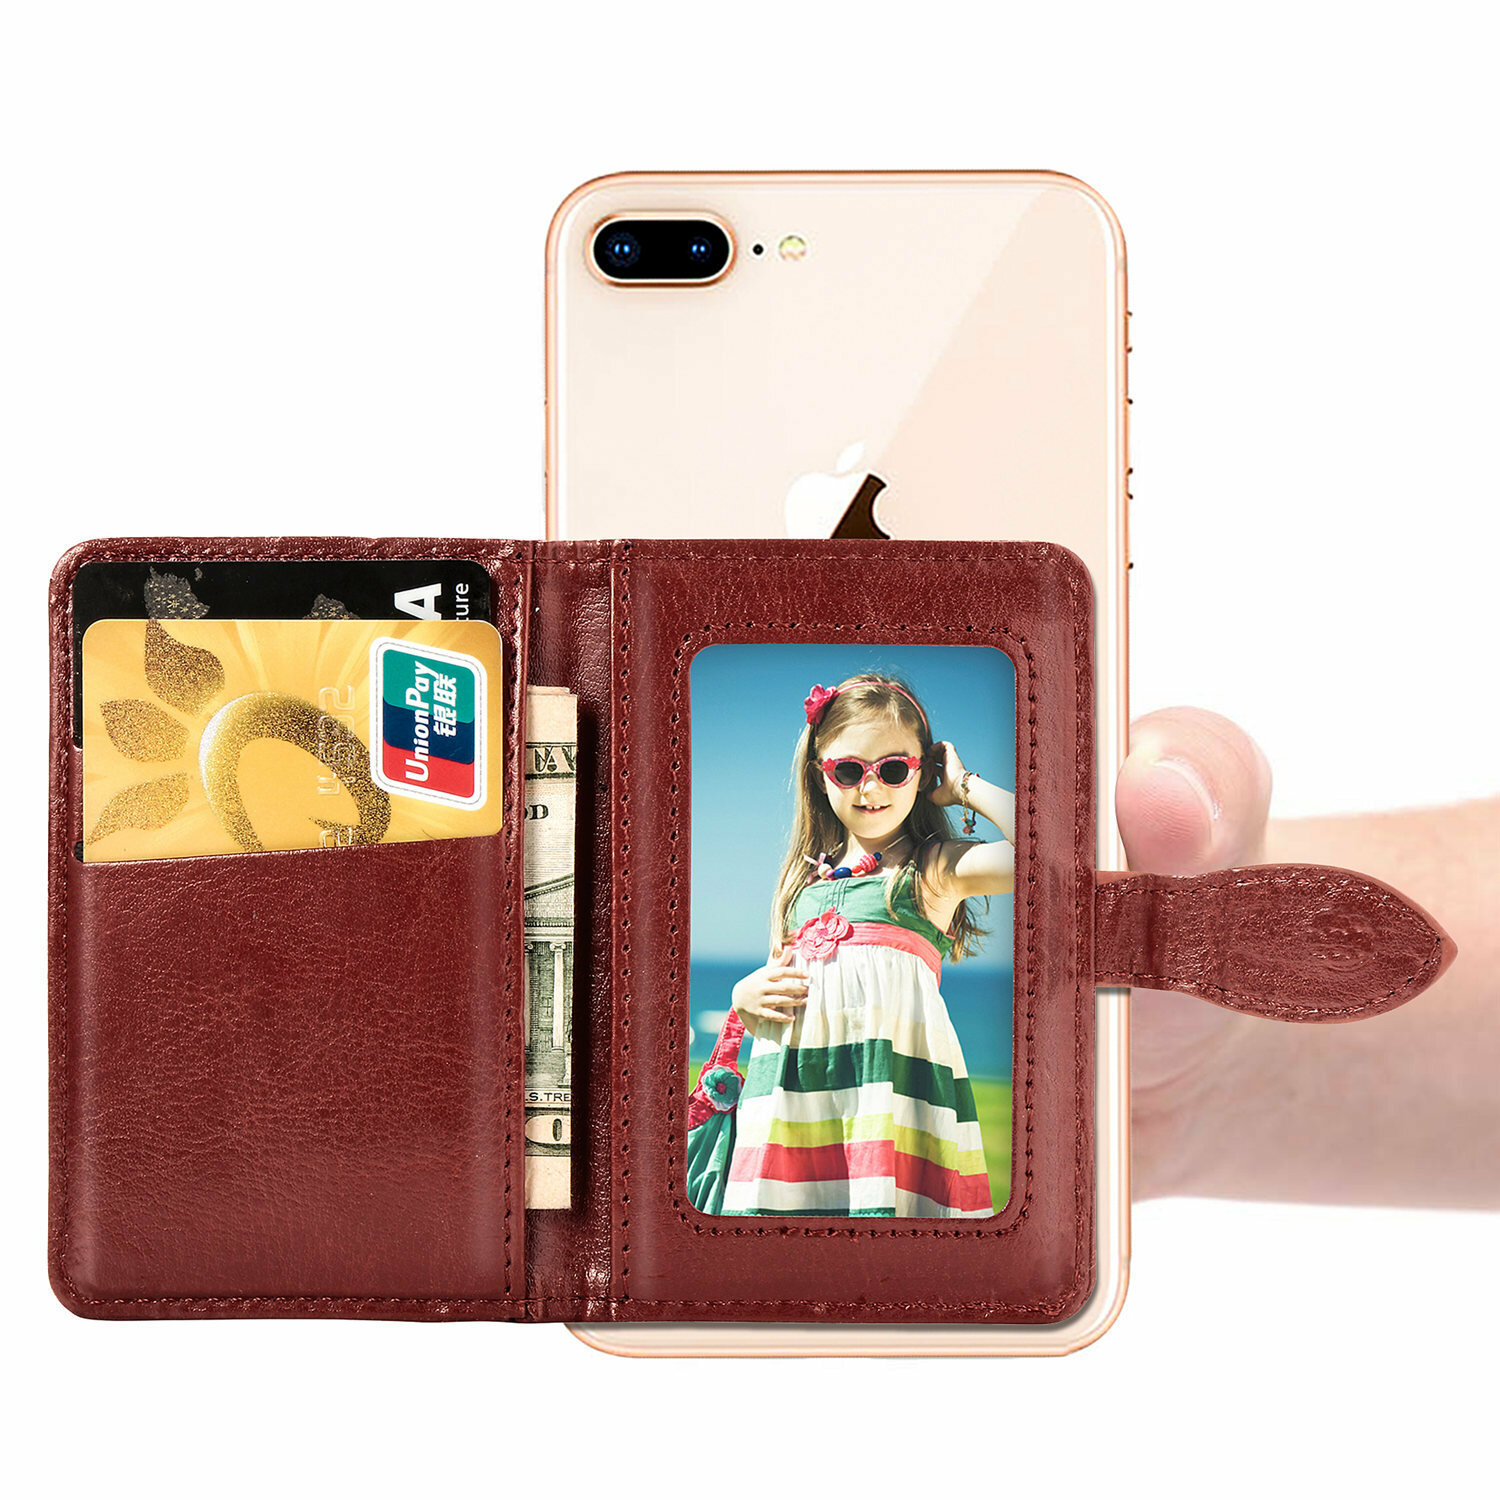 BEFOSPEY Stick On Phone Wallet Business 3M Adhesive Sticker Magnetic Flip PU Leather Credit Card Holder Sleeve Cellphone Wallet Pouch